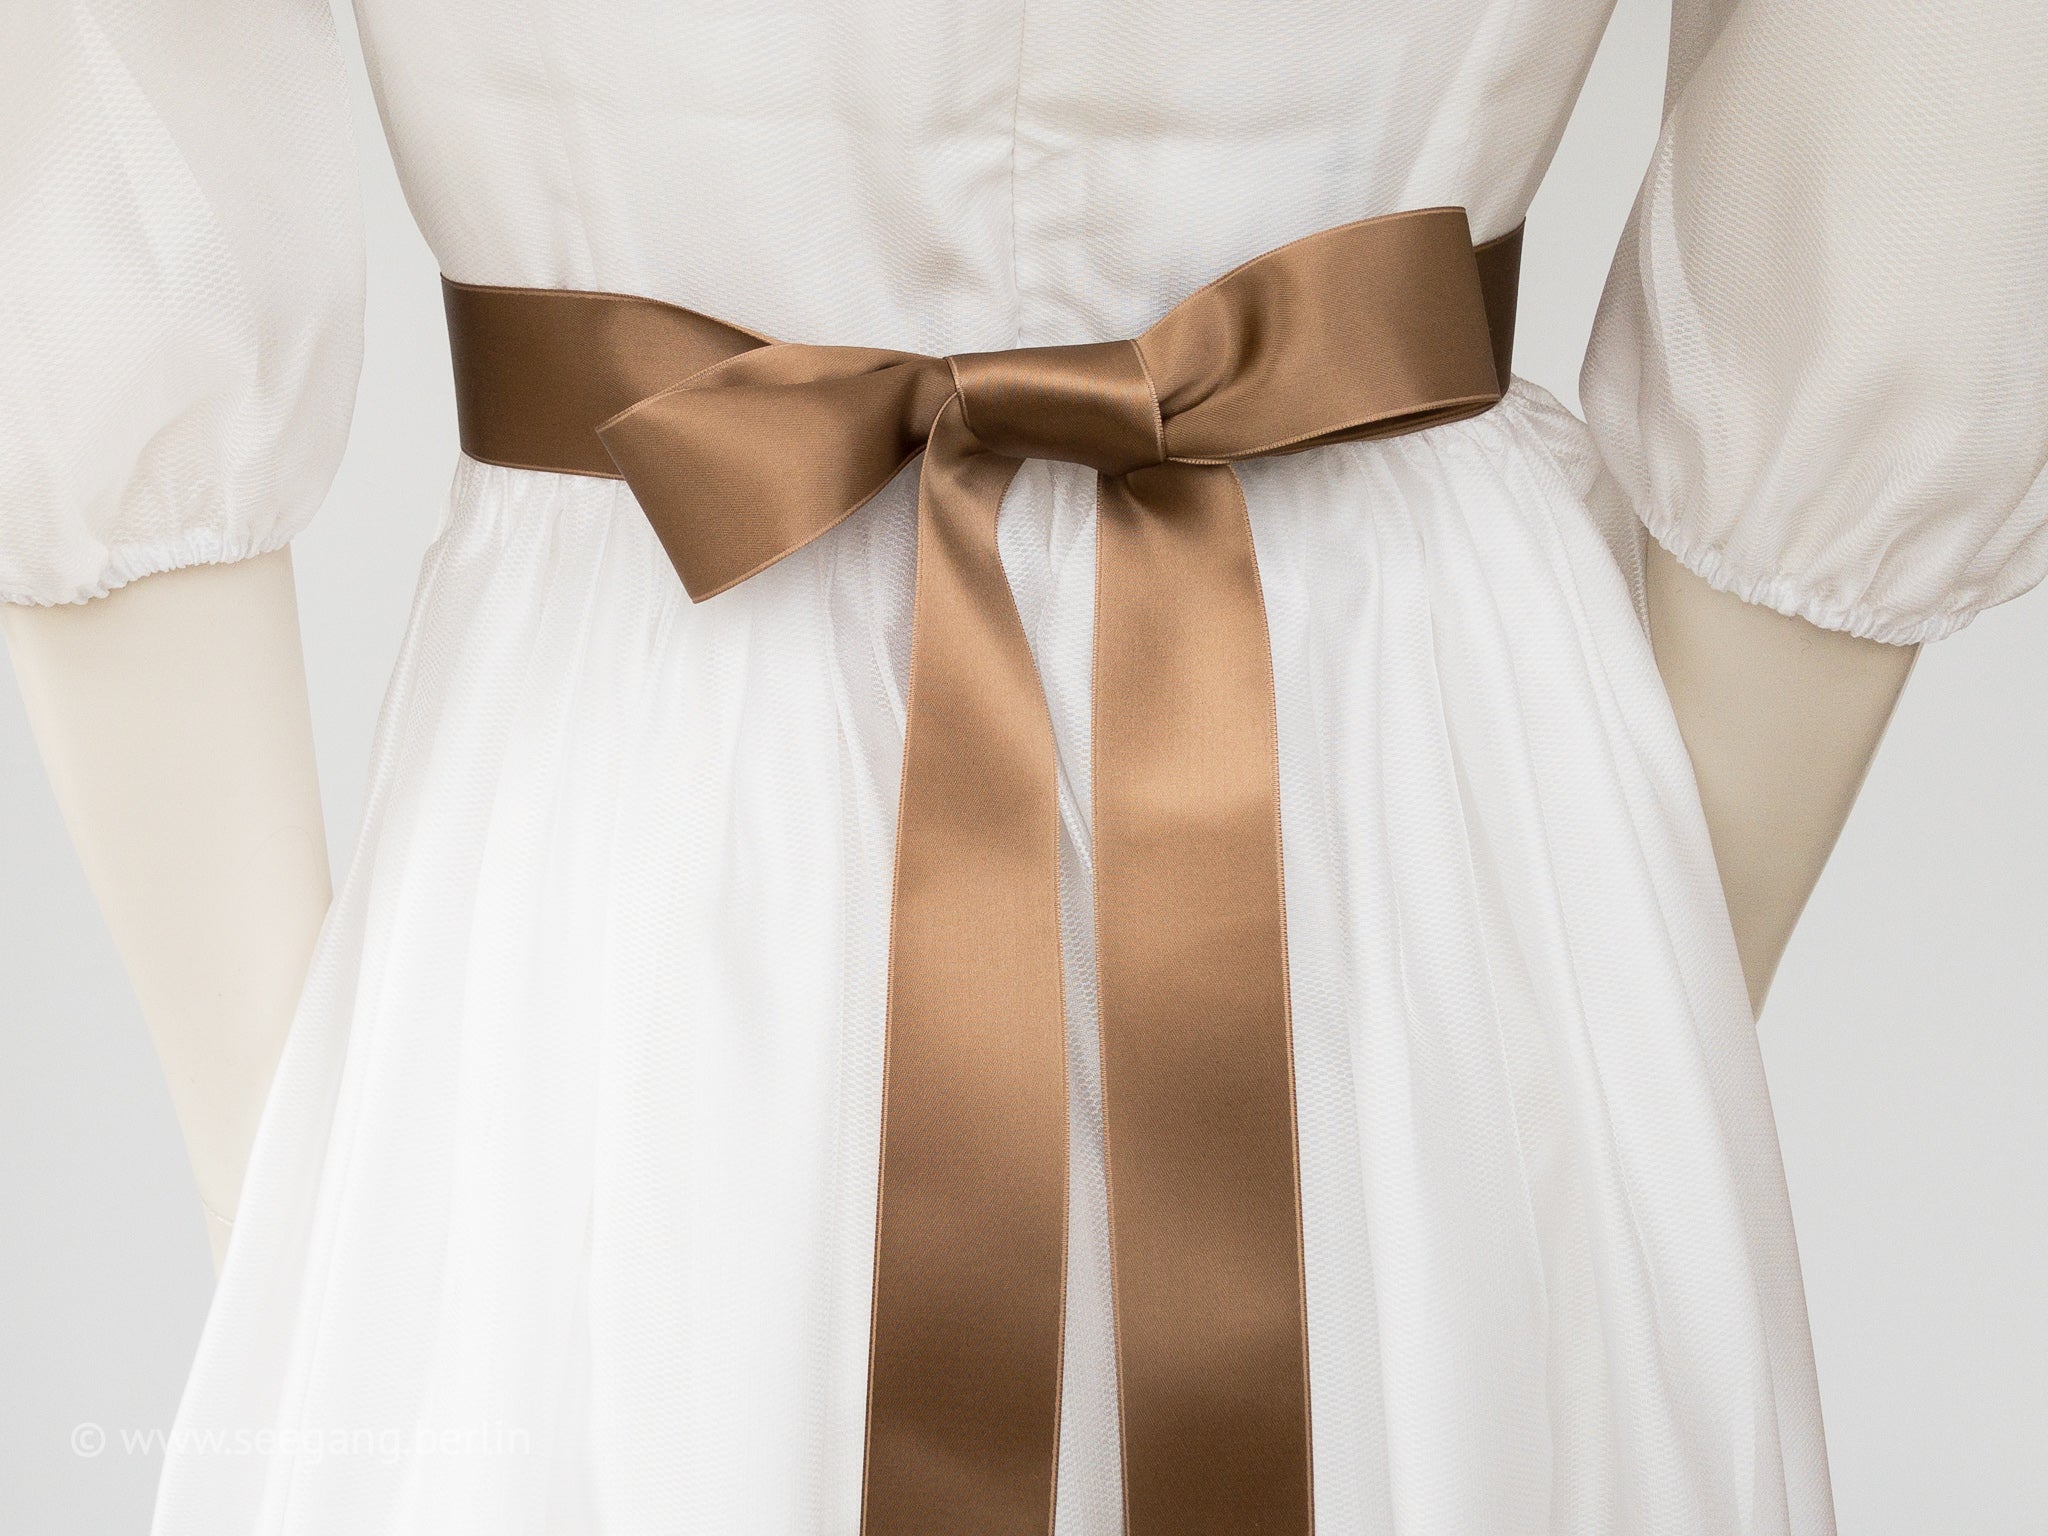 BRIDAL BELT IN MANY SHADES OF BROWN - SWISS QUALITY!